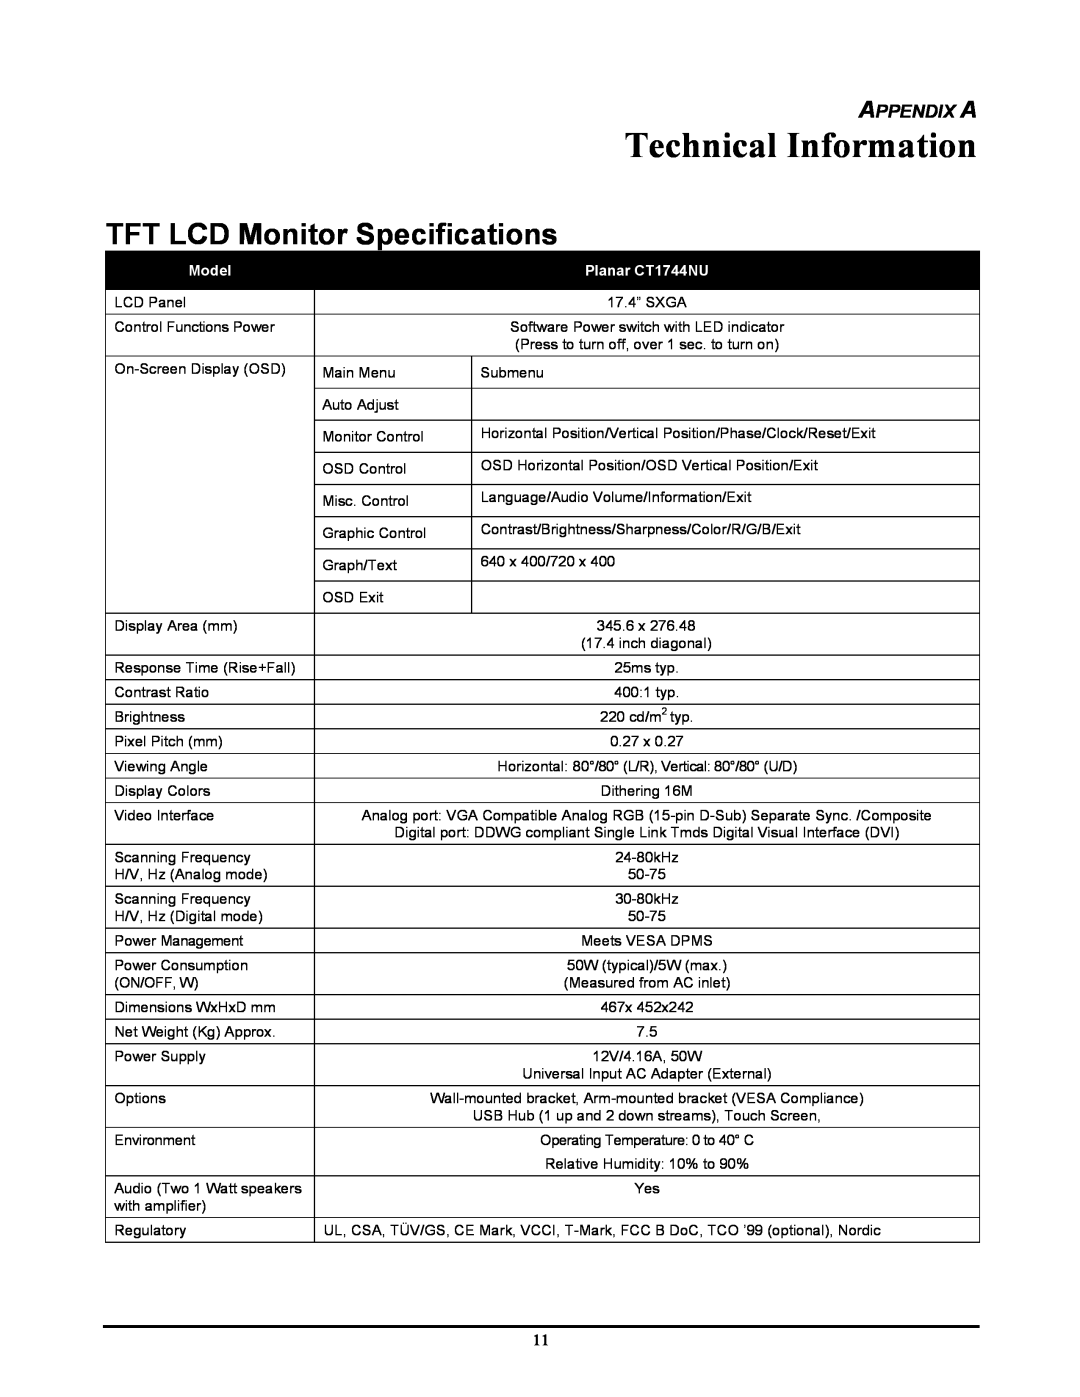 Planar manual Technical Information, TFT LCD Monitor Specifications, Appendix A, Model, Planar CT1744NU 